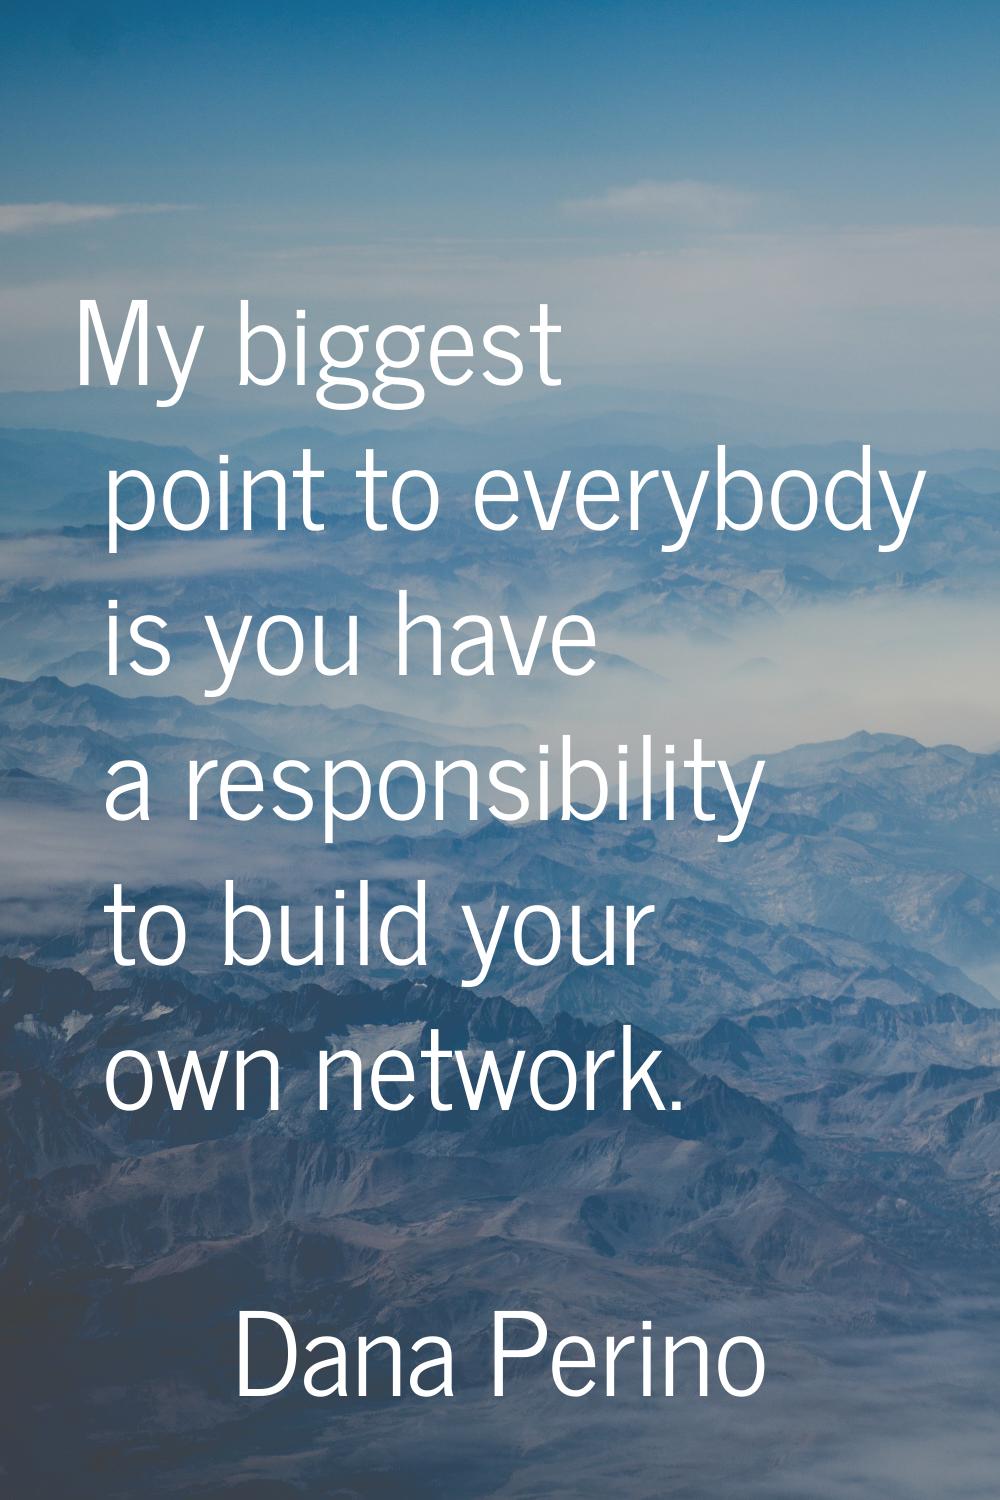 My biggest point to everybody is you have a responsibility to build your own network.